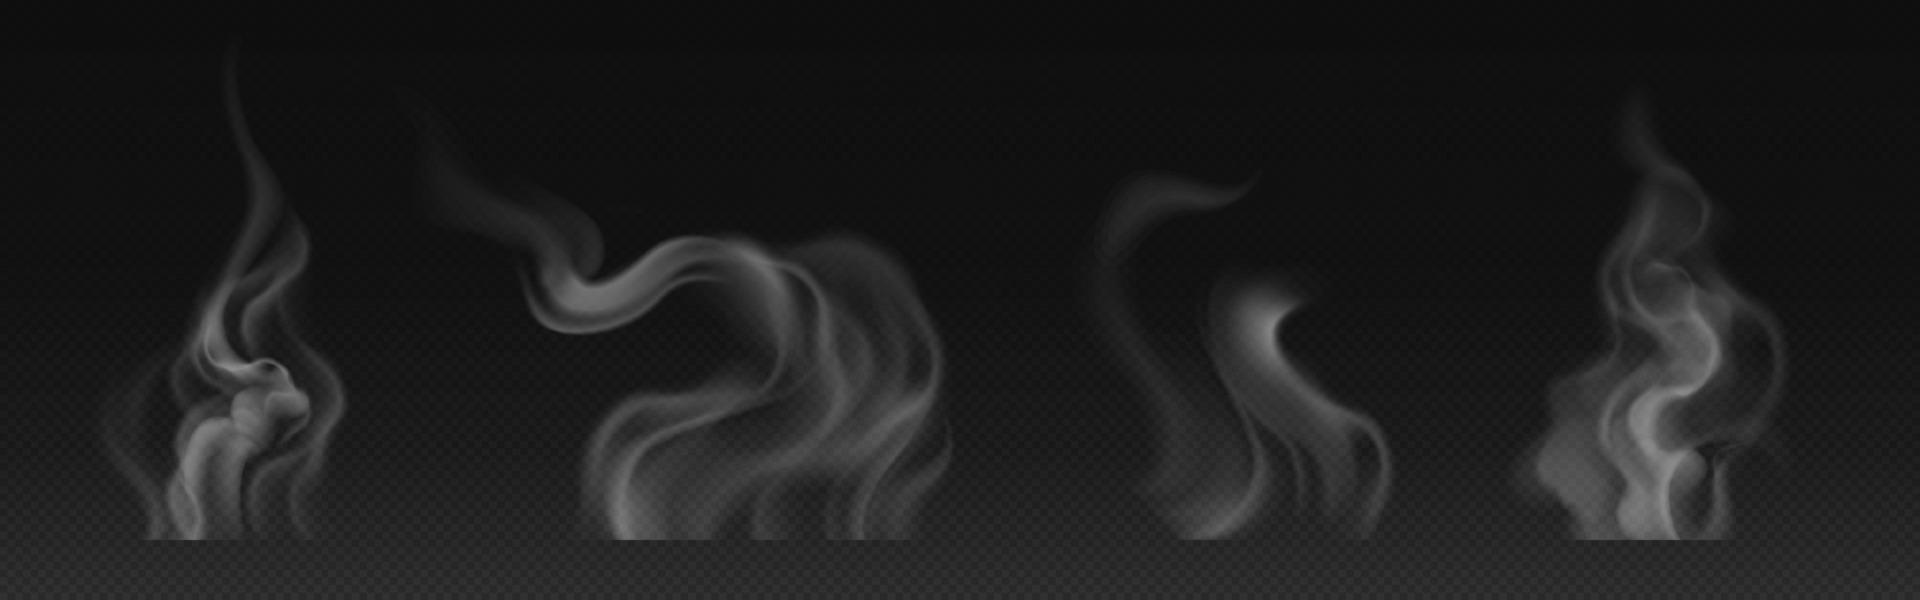 Tea smoke, coffee cup, food steam or vapor clouds on black background. vector